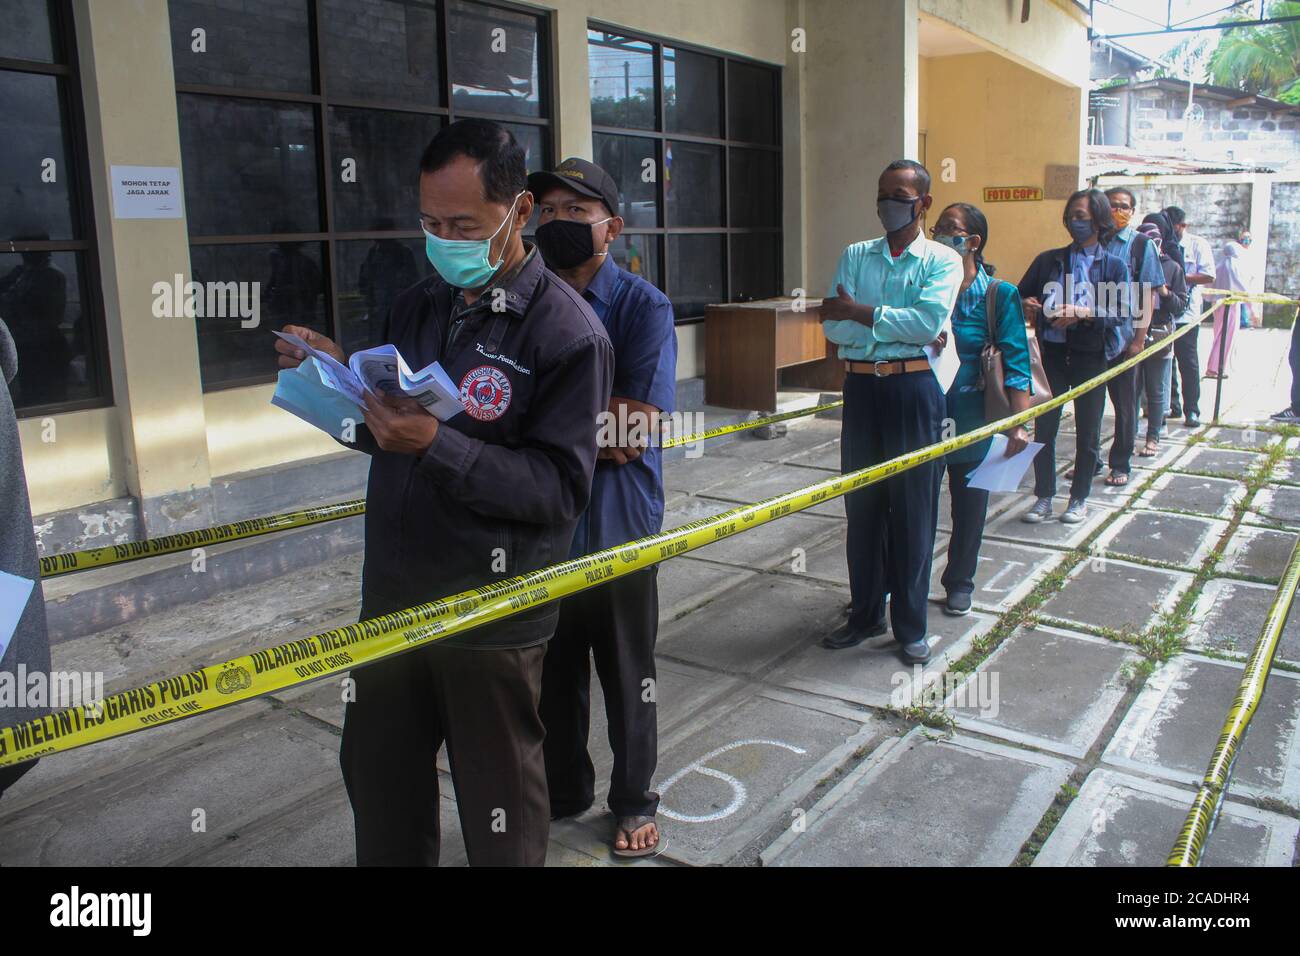 Sleman, YOGYAKARTA, INDONESIA. 6th Aug, 2020. A number of residents queued  for driving licenses in Sleman, Yogyakarta, Indonesia on Thursday, August  6, 2020. The Indonesian Central Bureau of Statistics (BPS) released  Indonesia's